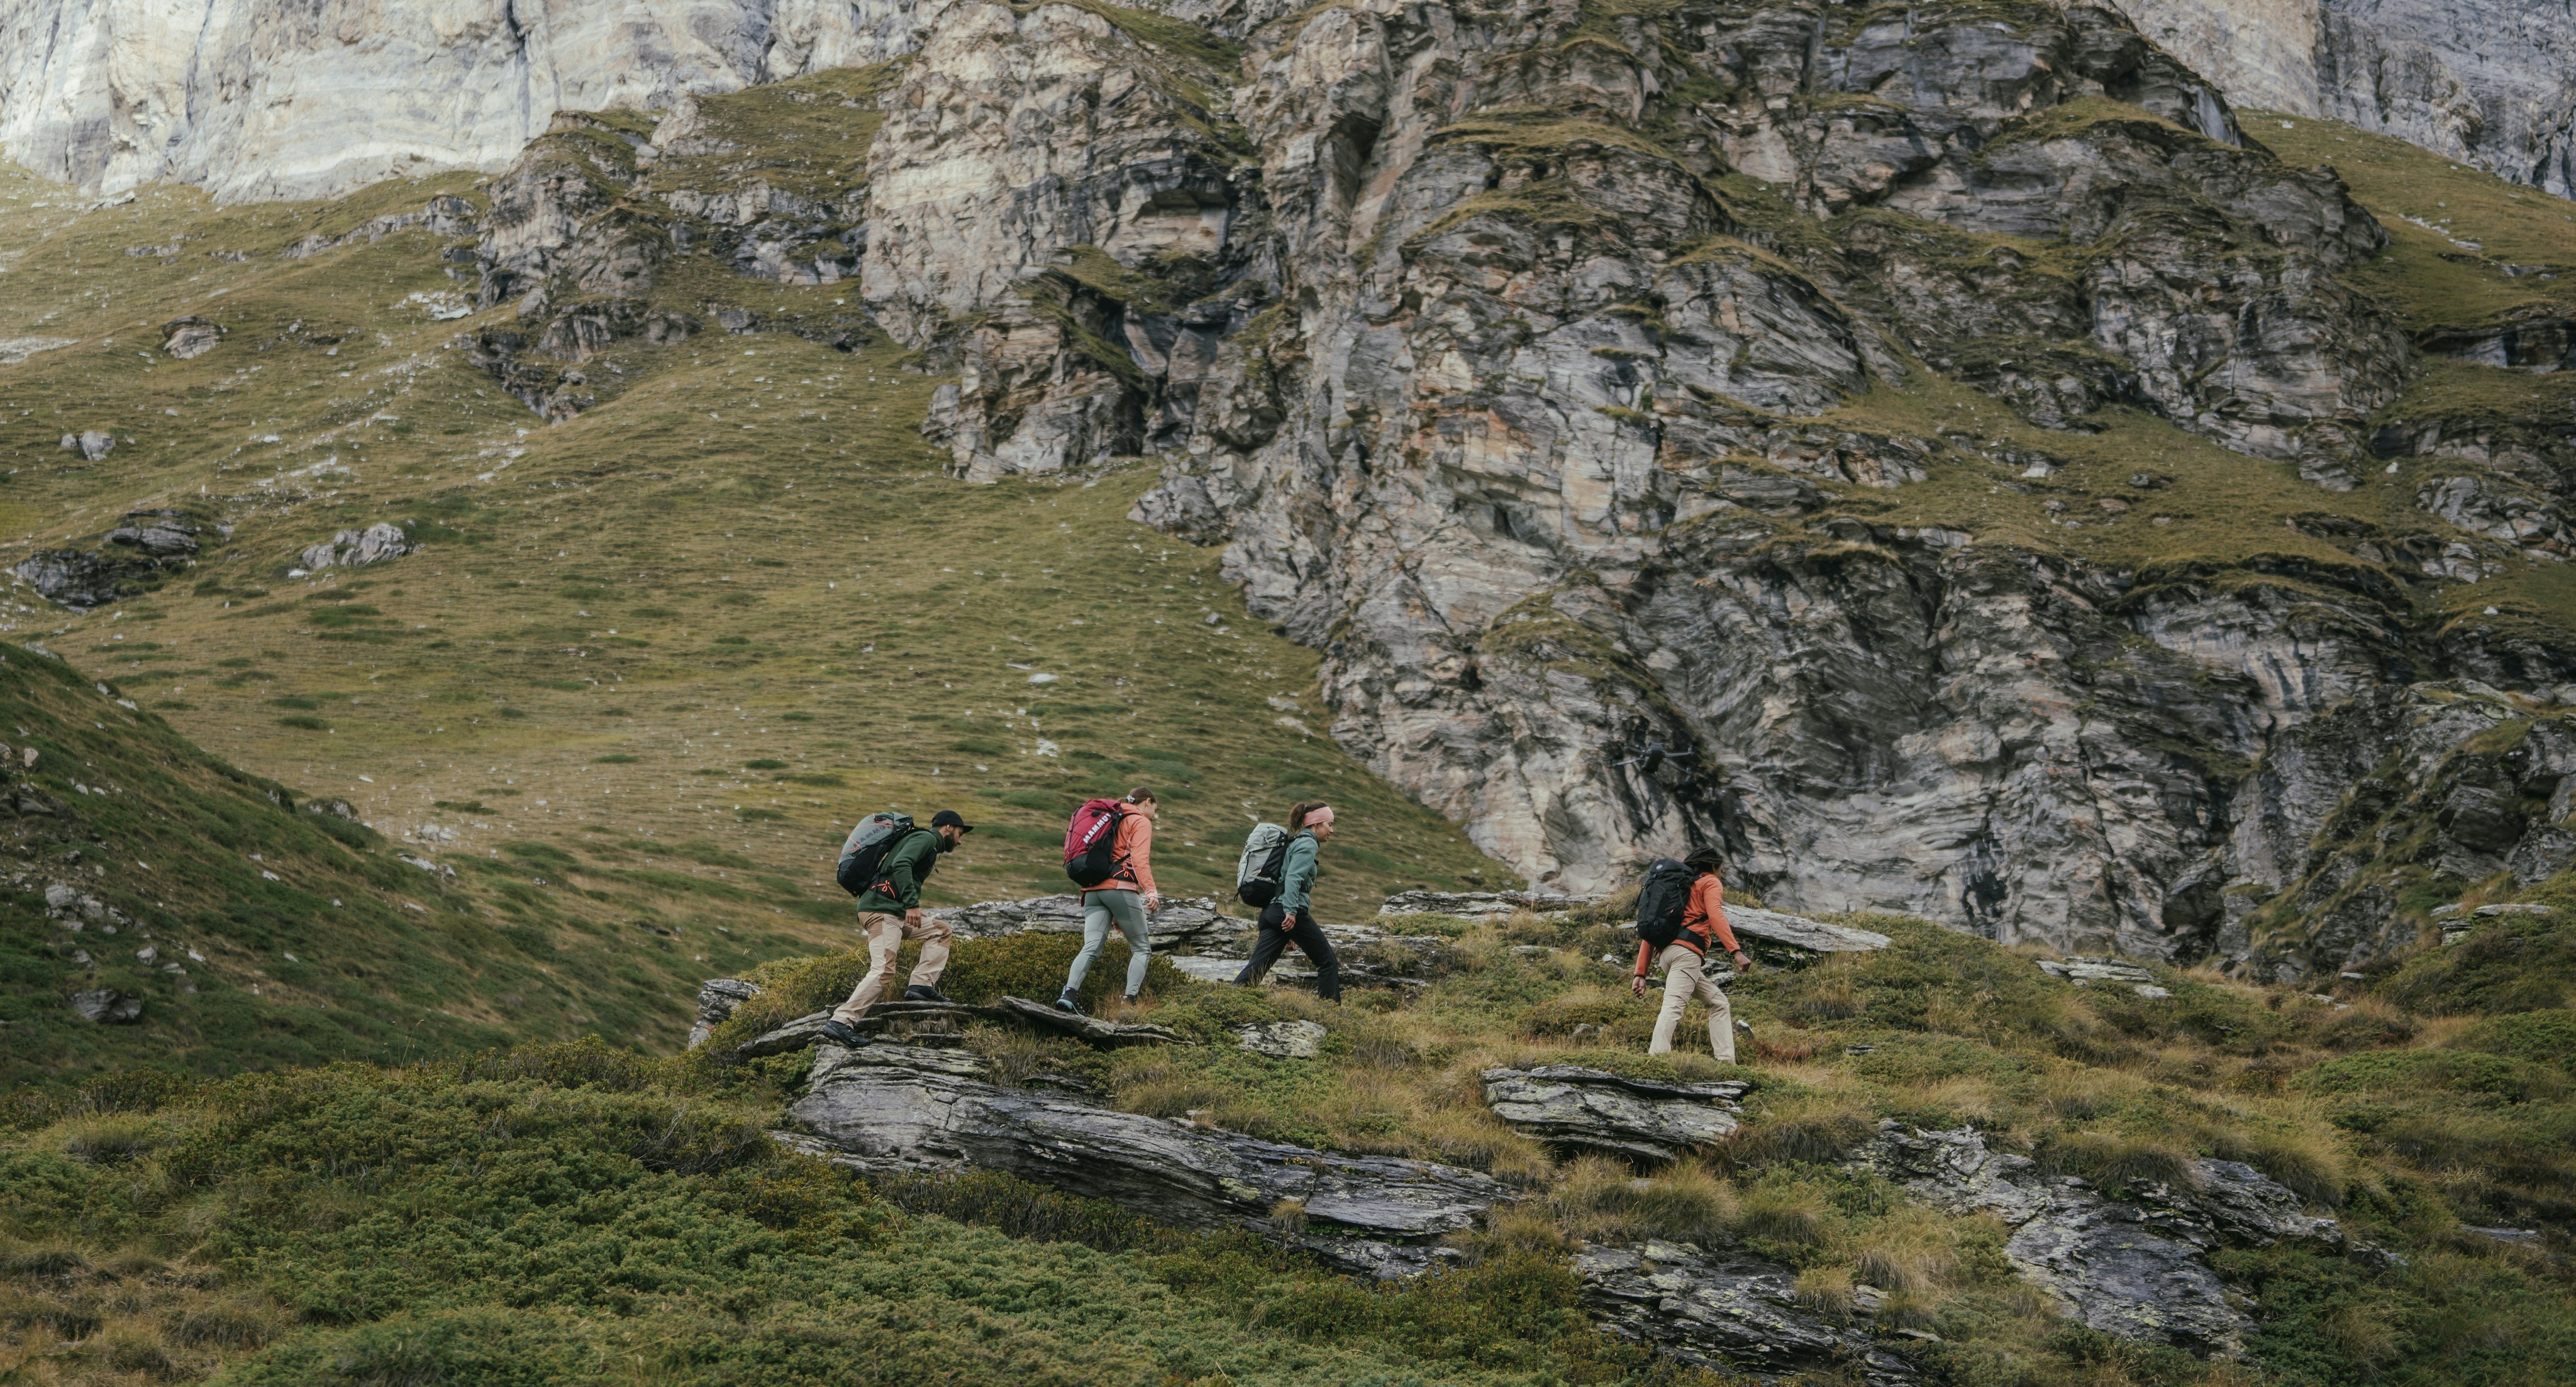 Four Mammut-clad hikers with backpacks trek in unison along a rocky, grassy trail set against the majestic backdrop of steep, rugged mountains. The vibrant landscape features lush green patches of shrubs and striking stratified cliff faces.